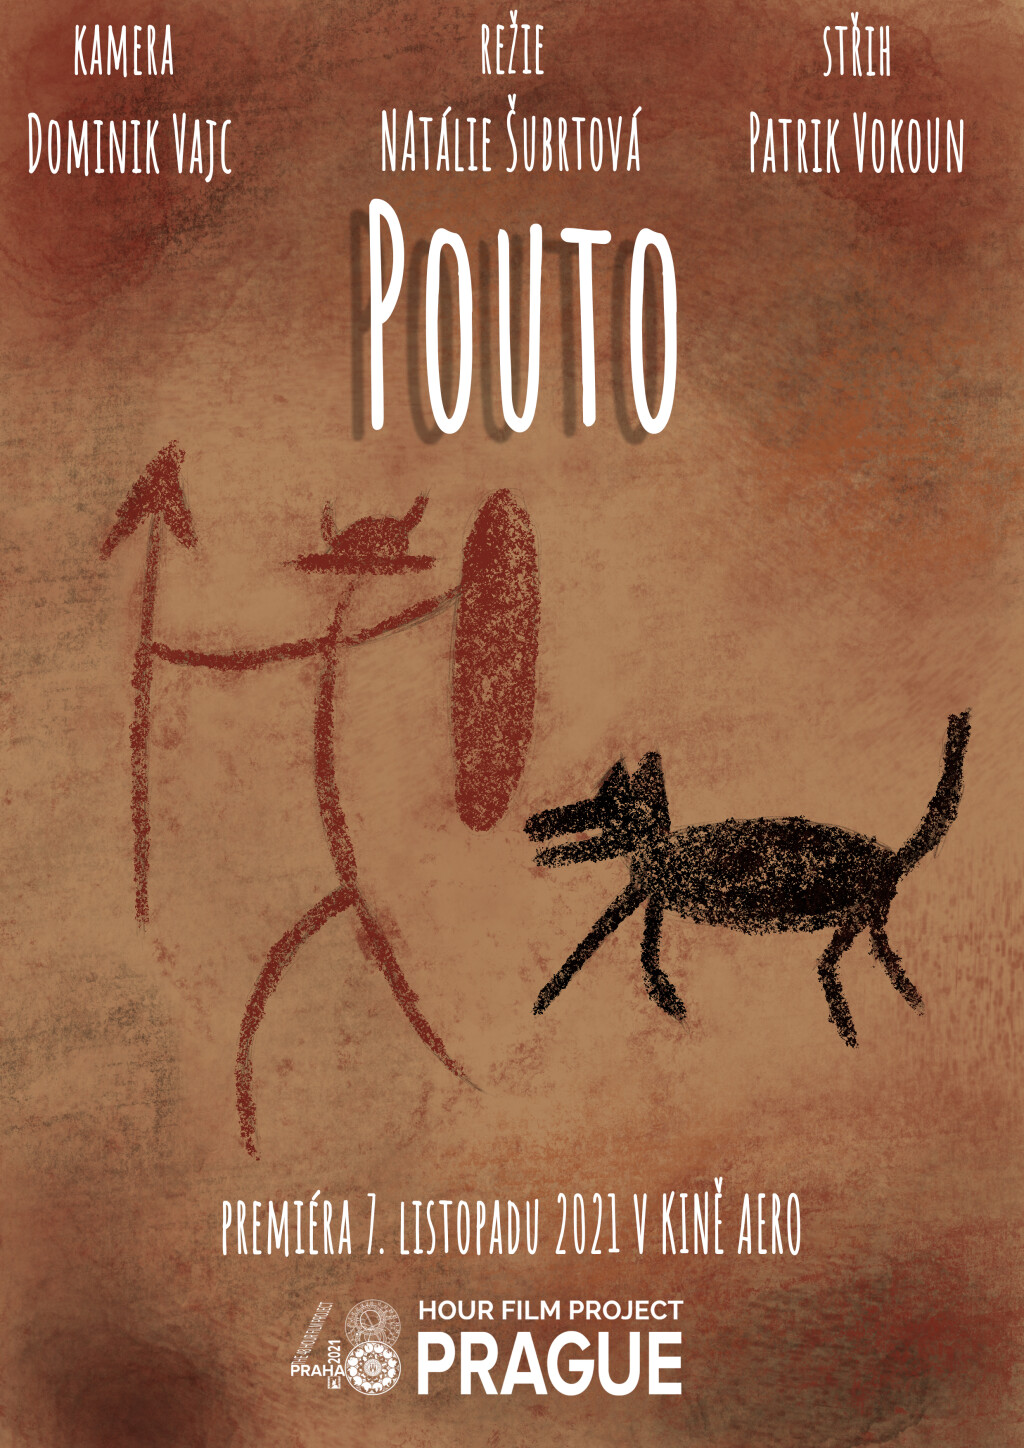 Filmposter for Pouto